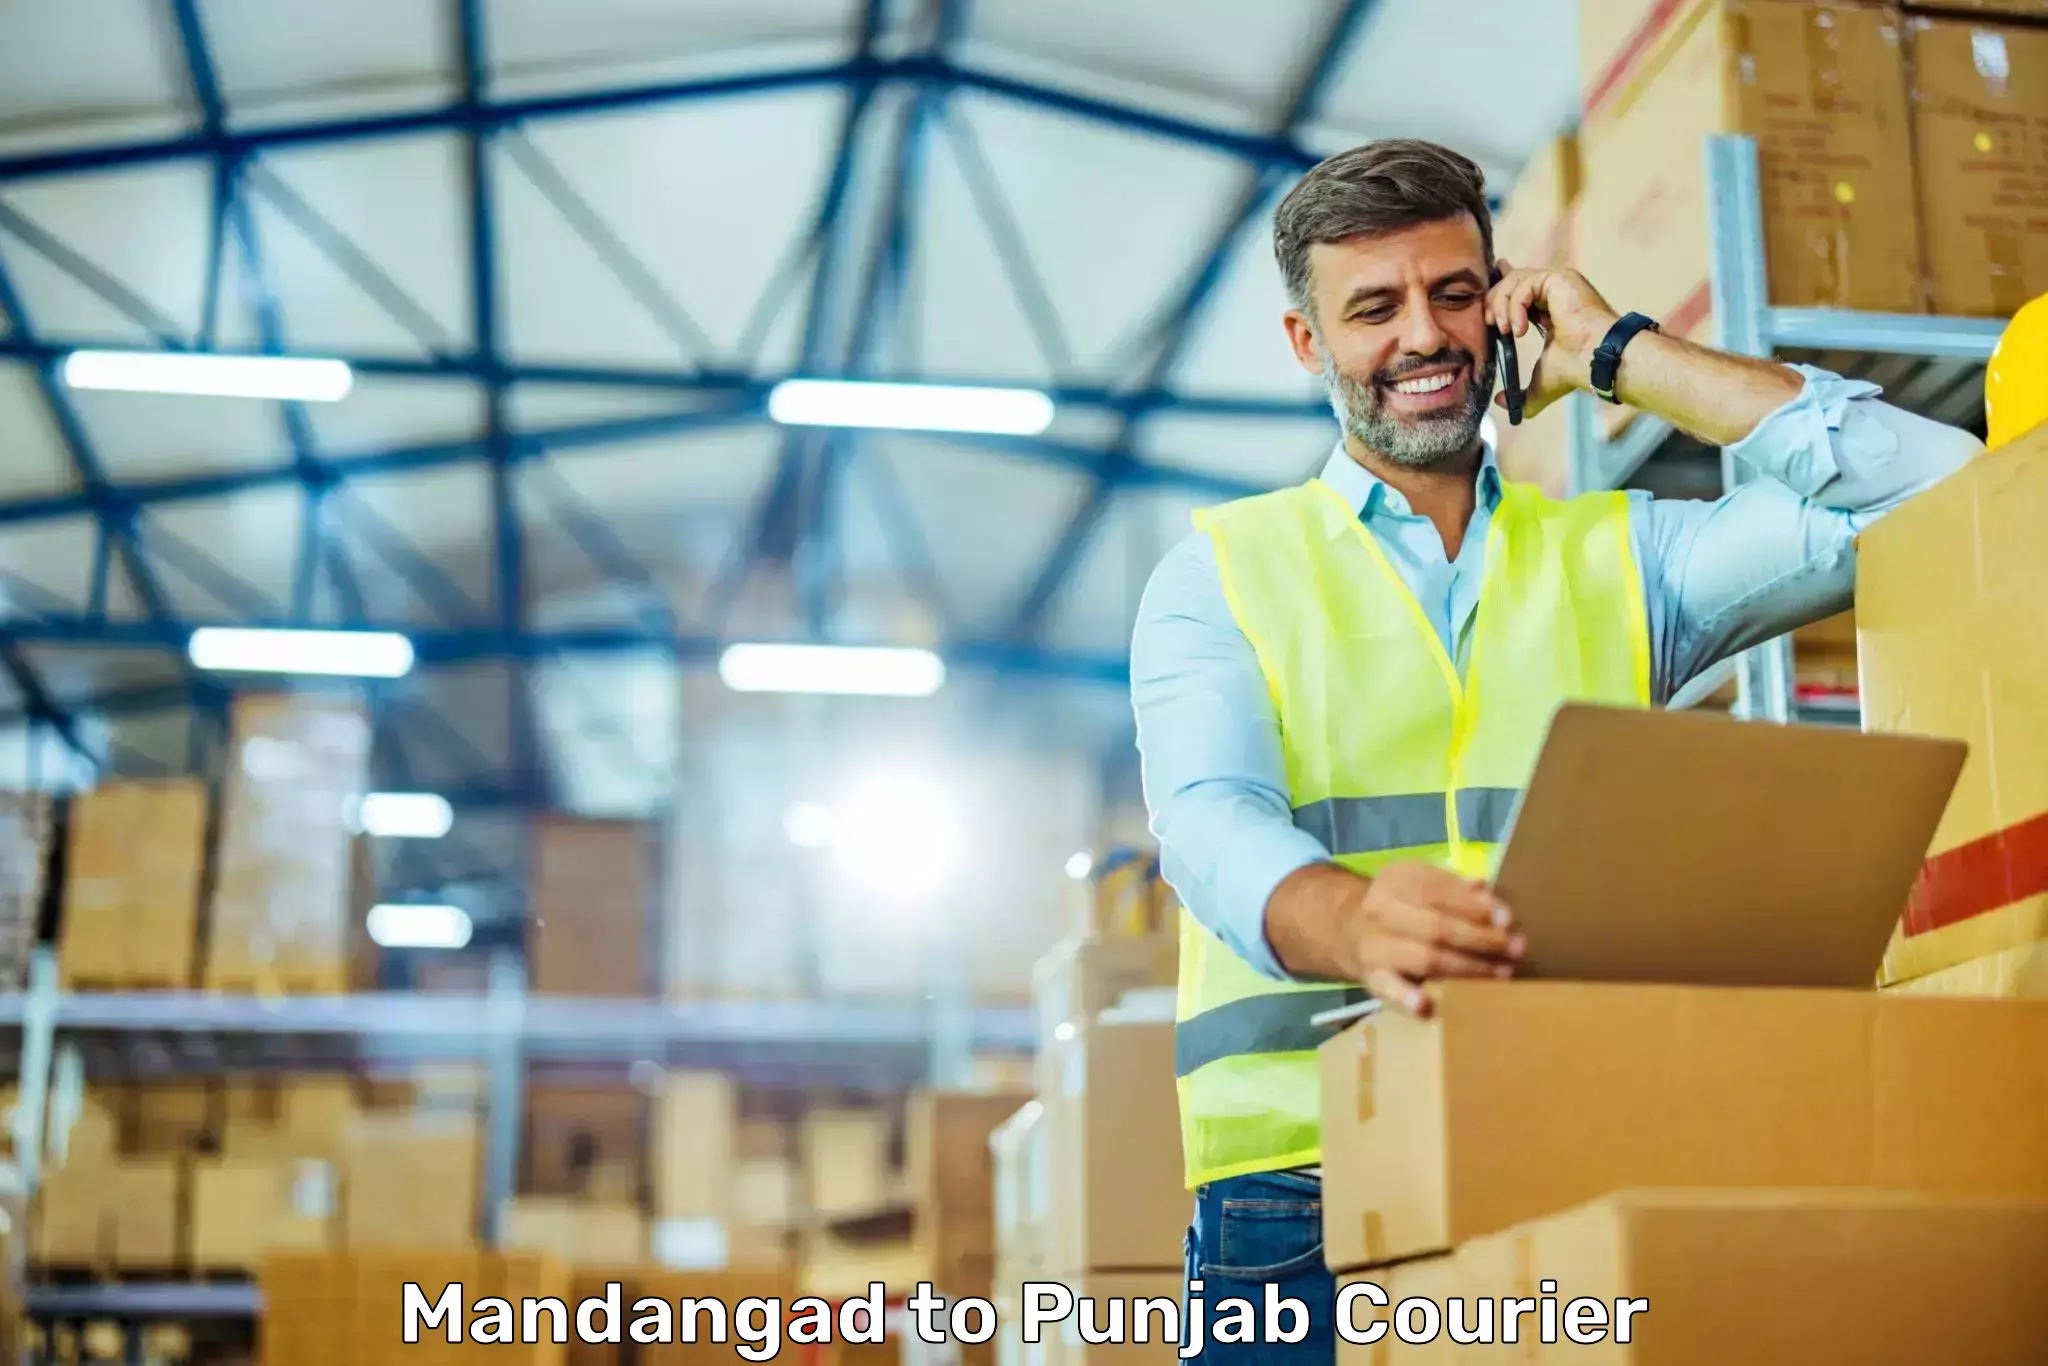 User-friendly delivery service Mandangad to Patiala